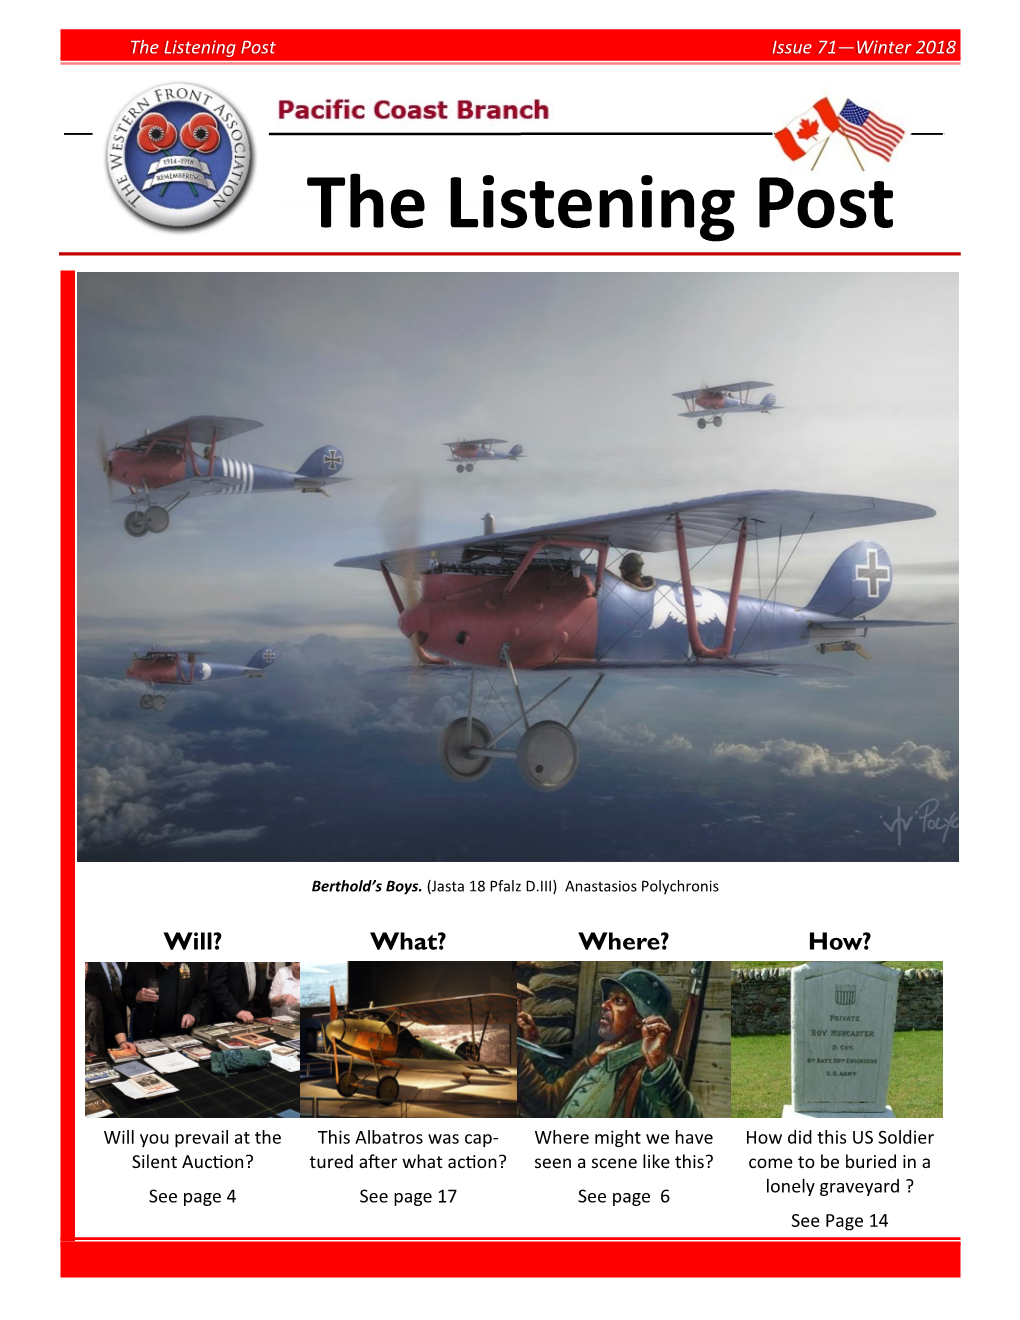 The Listening Post Issue 71—Winter 2018